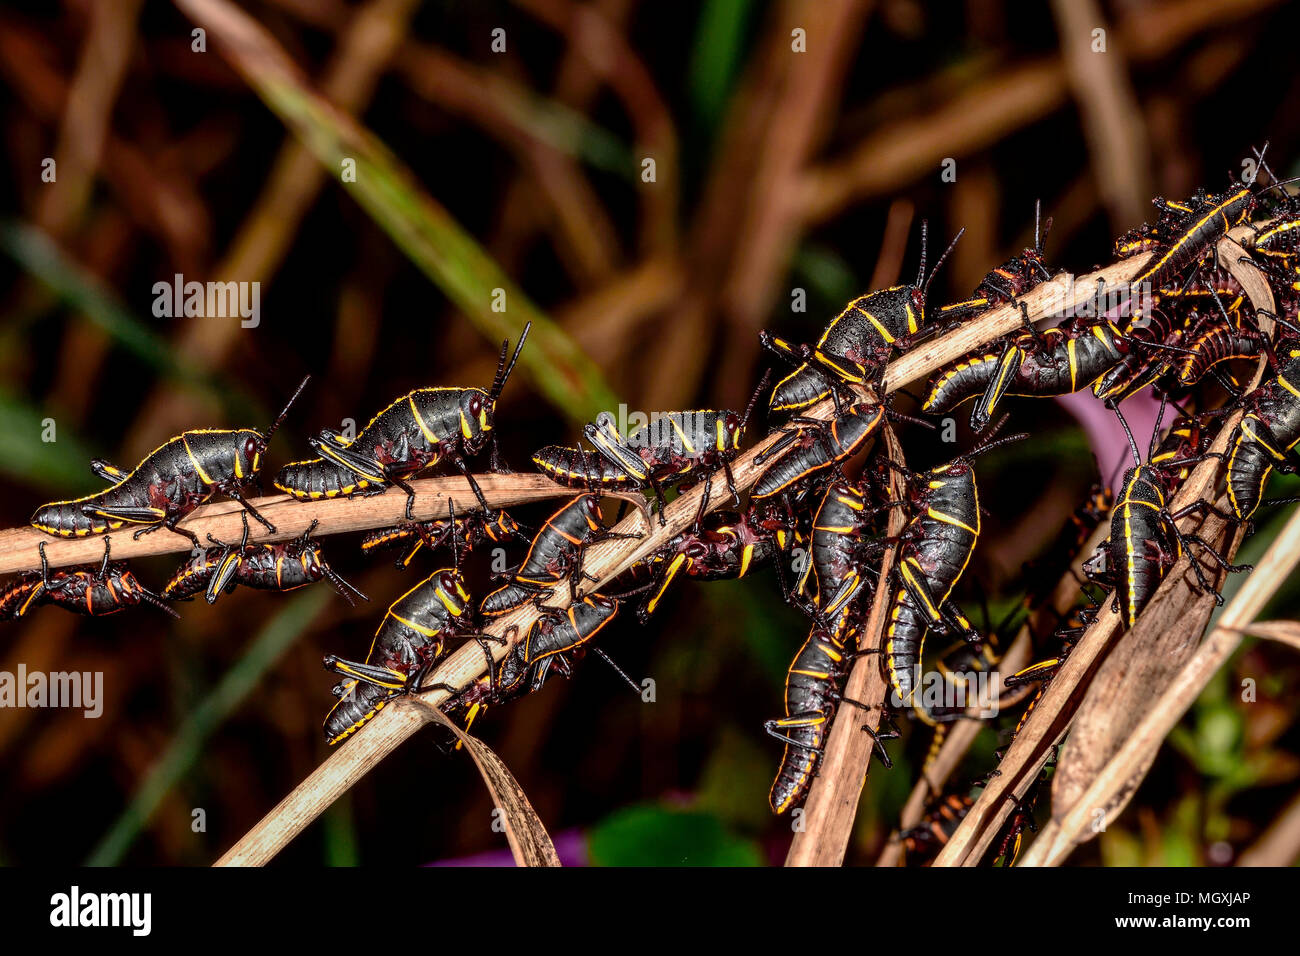 Eastern lubber grasshoppers waiting for the sunrise. Stock Photo